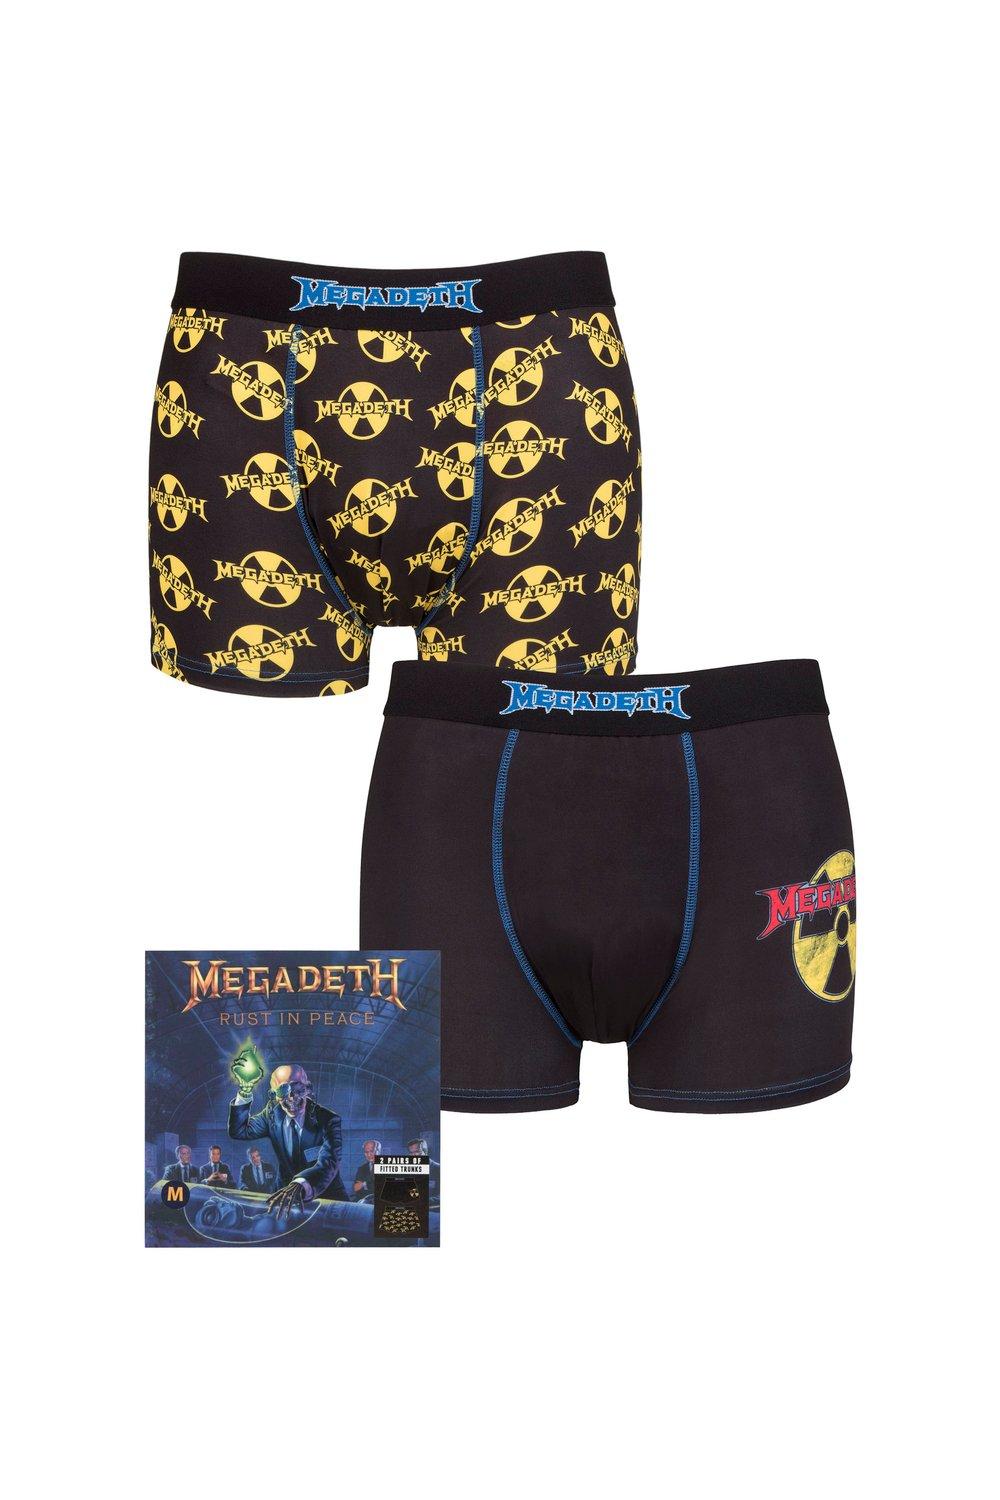 Megadeth 2 Pack Exclusive to Gift Boxed Boxer Shorts